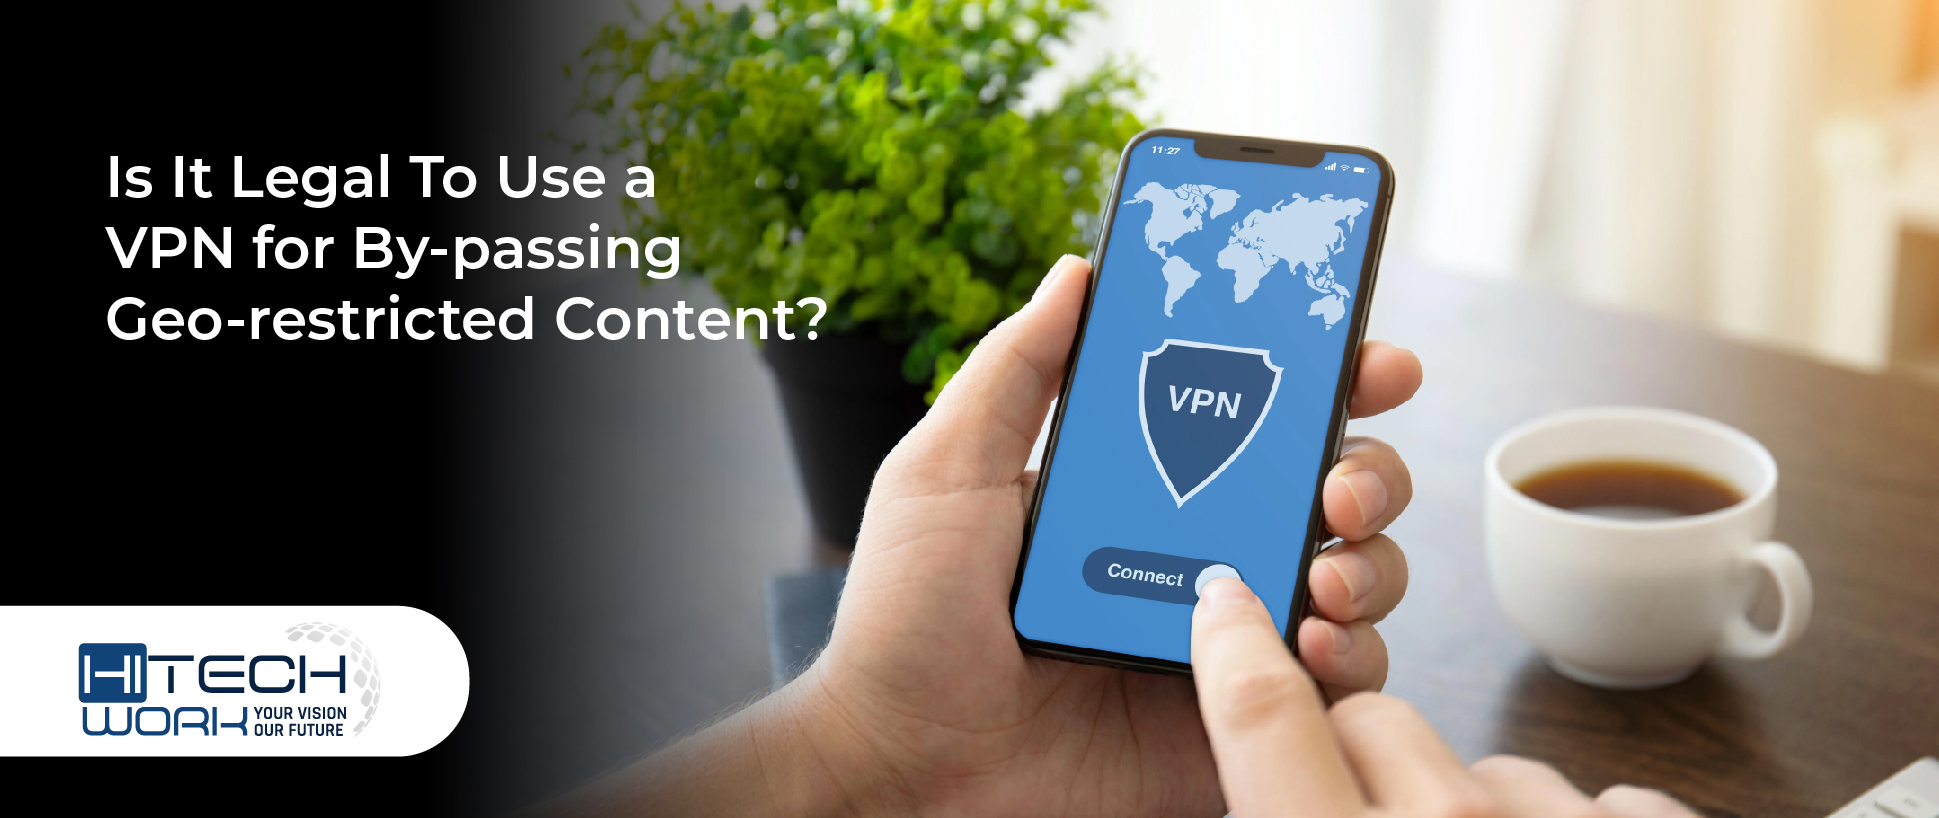 Legal To Use a VPN